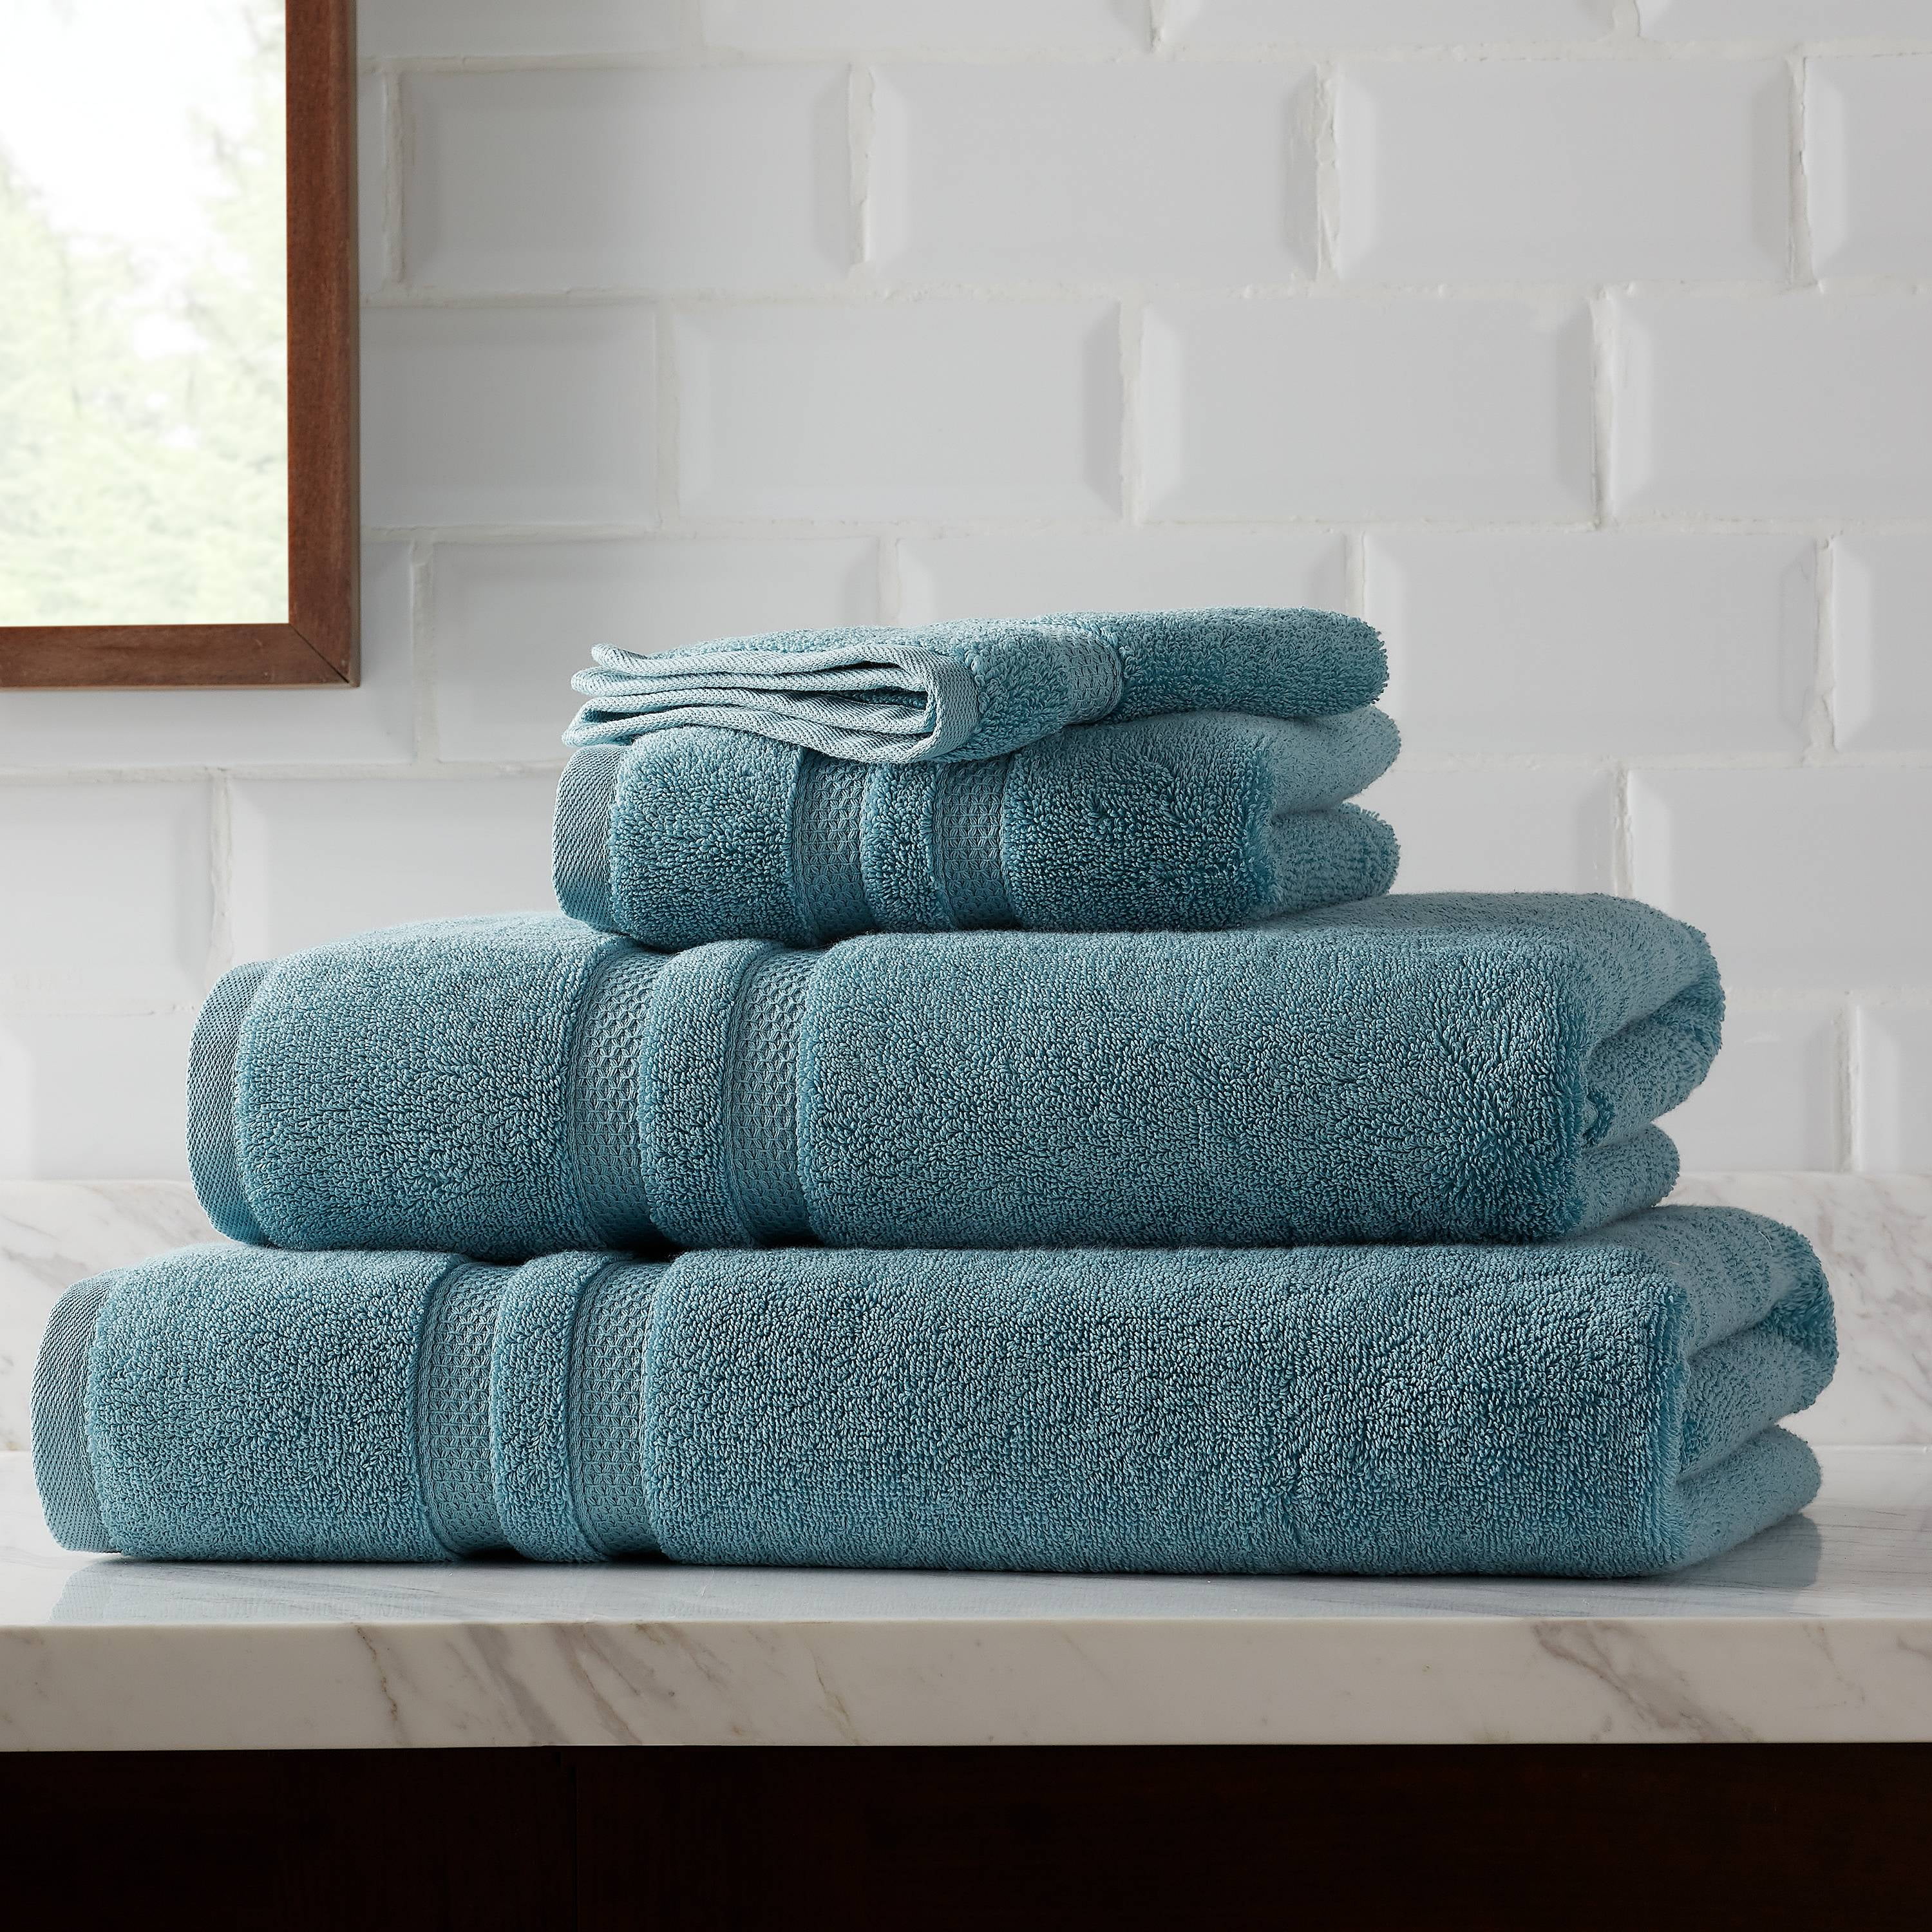 Hotel Style Turkish Cotton Bath Towel Collection Solid Print Teal 6 Piece  Set 